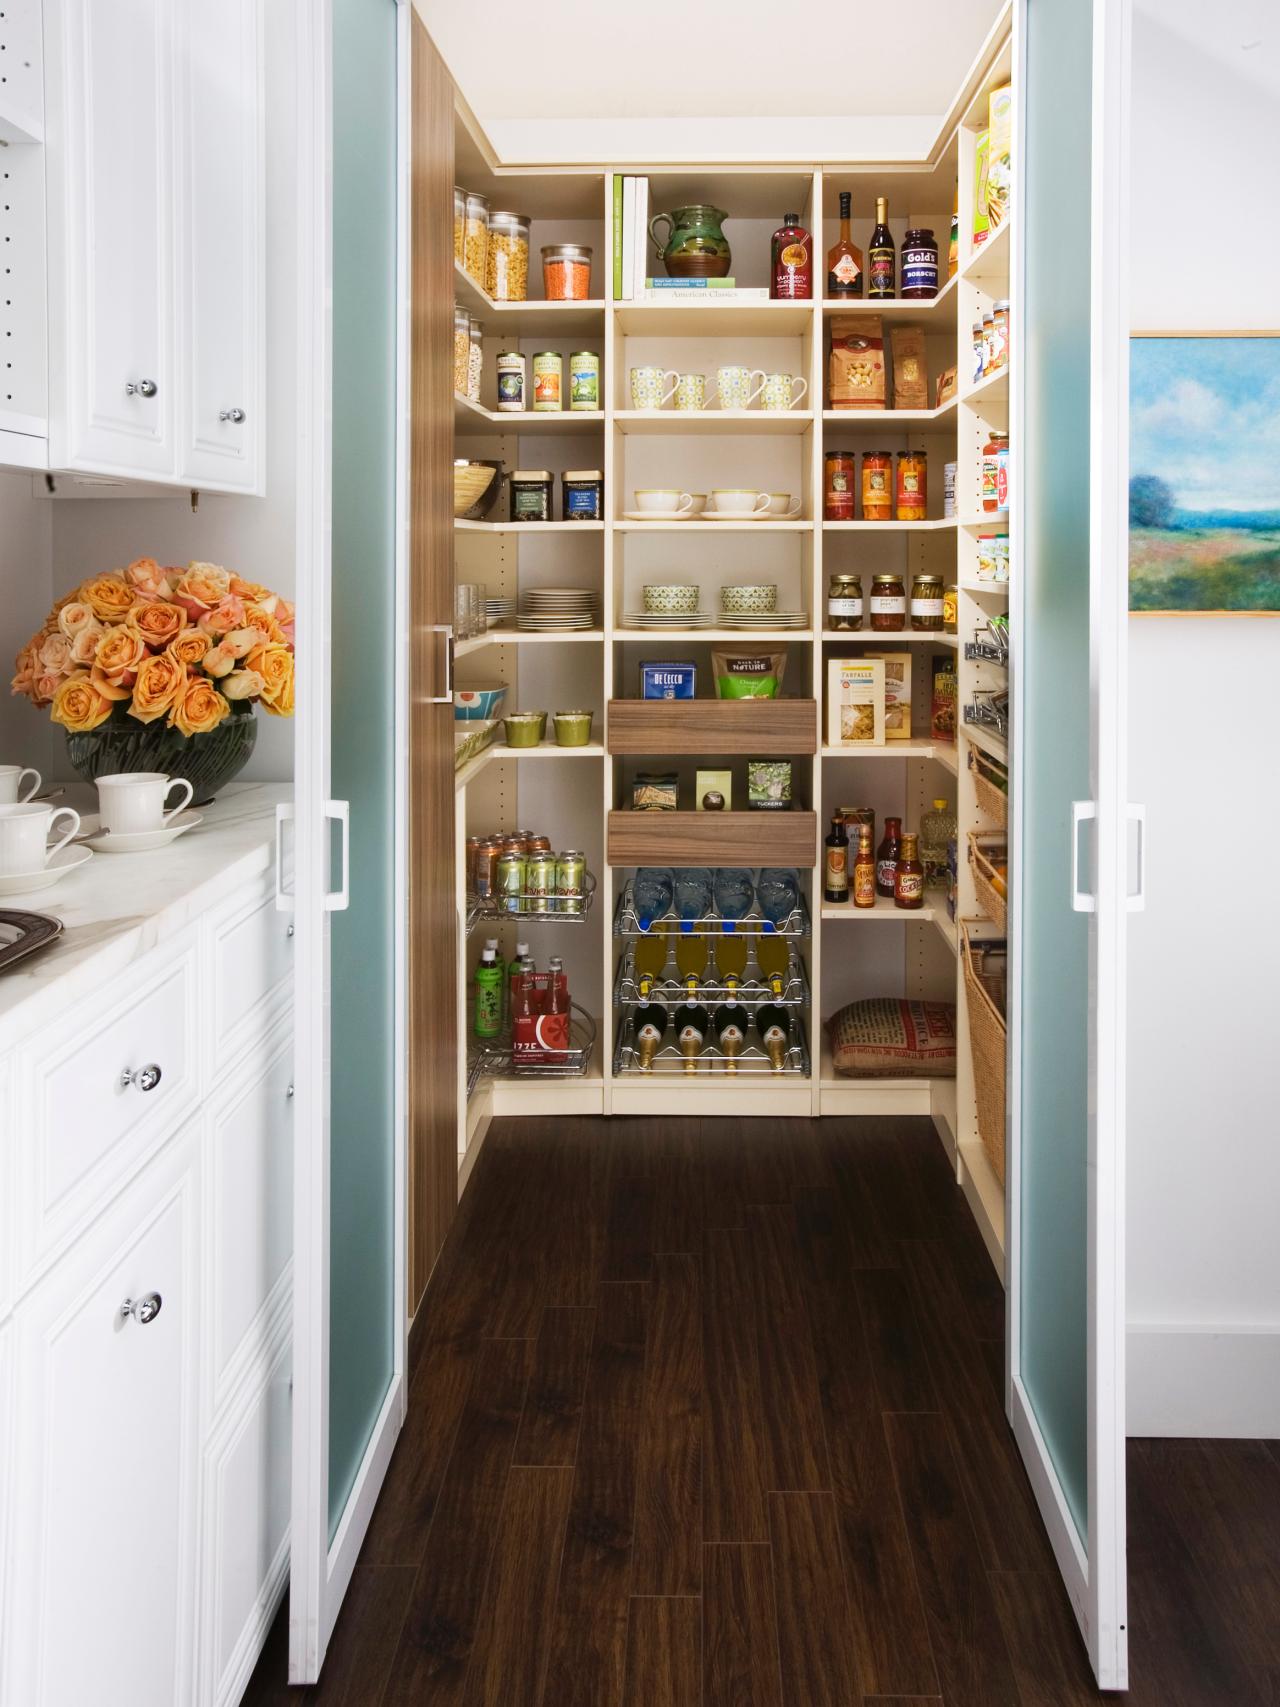 Kitchen Pantry Ideas and Accessories: HGTV Pictures & Ideas | HGTV